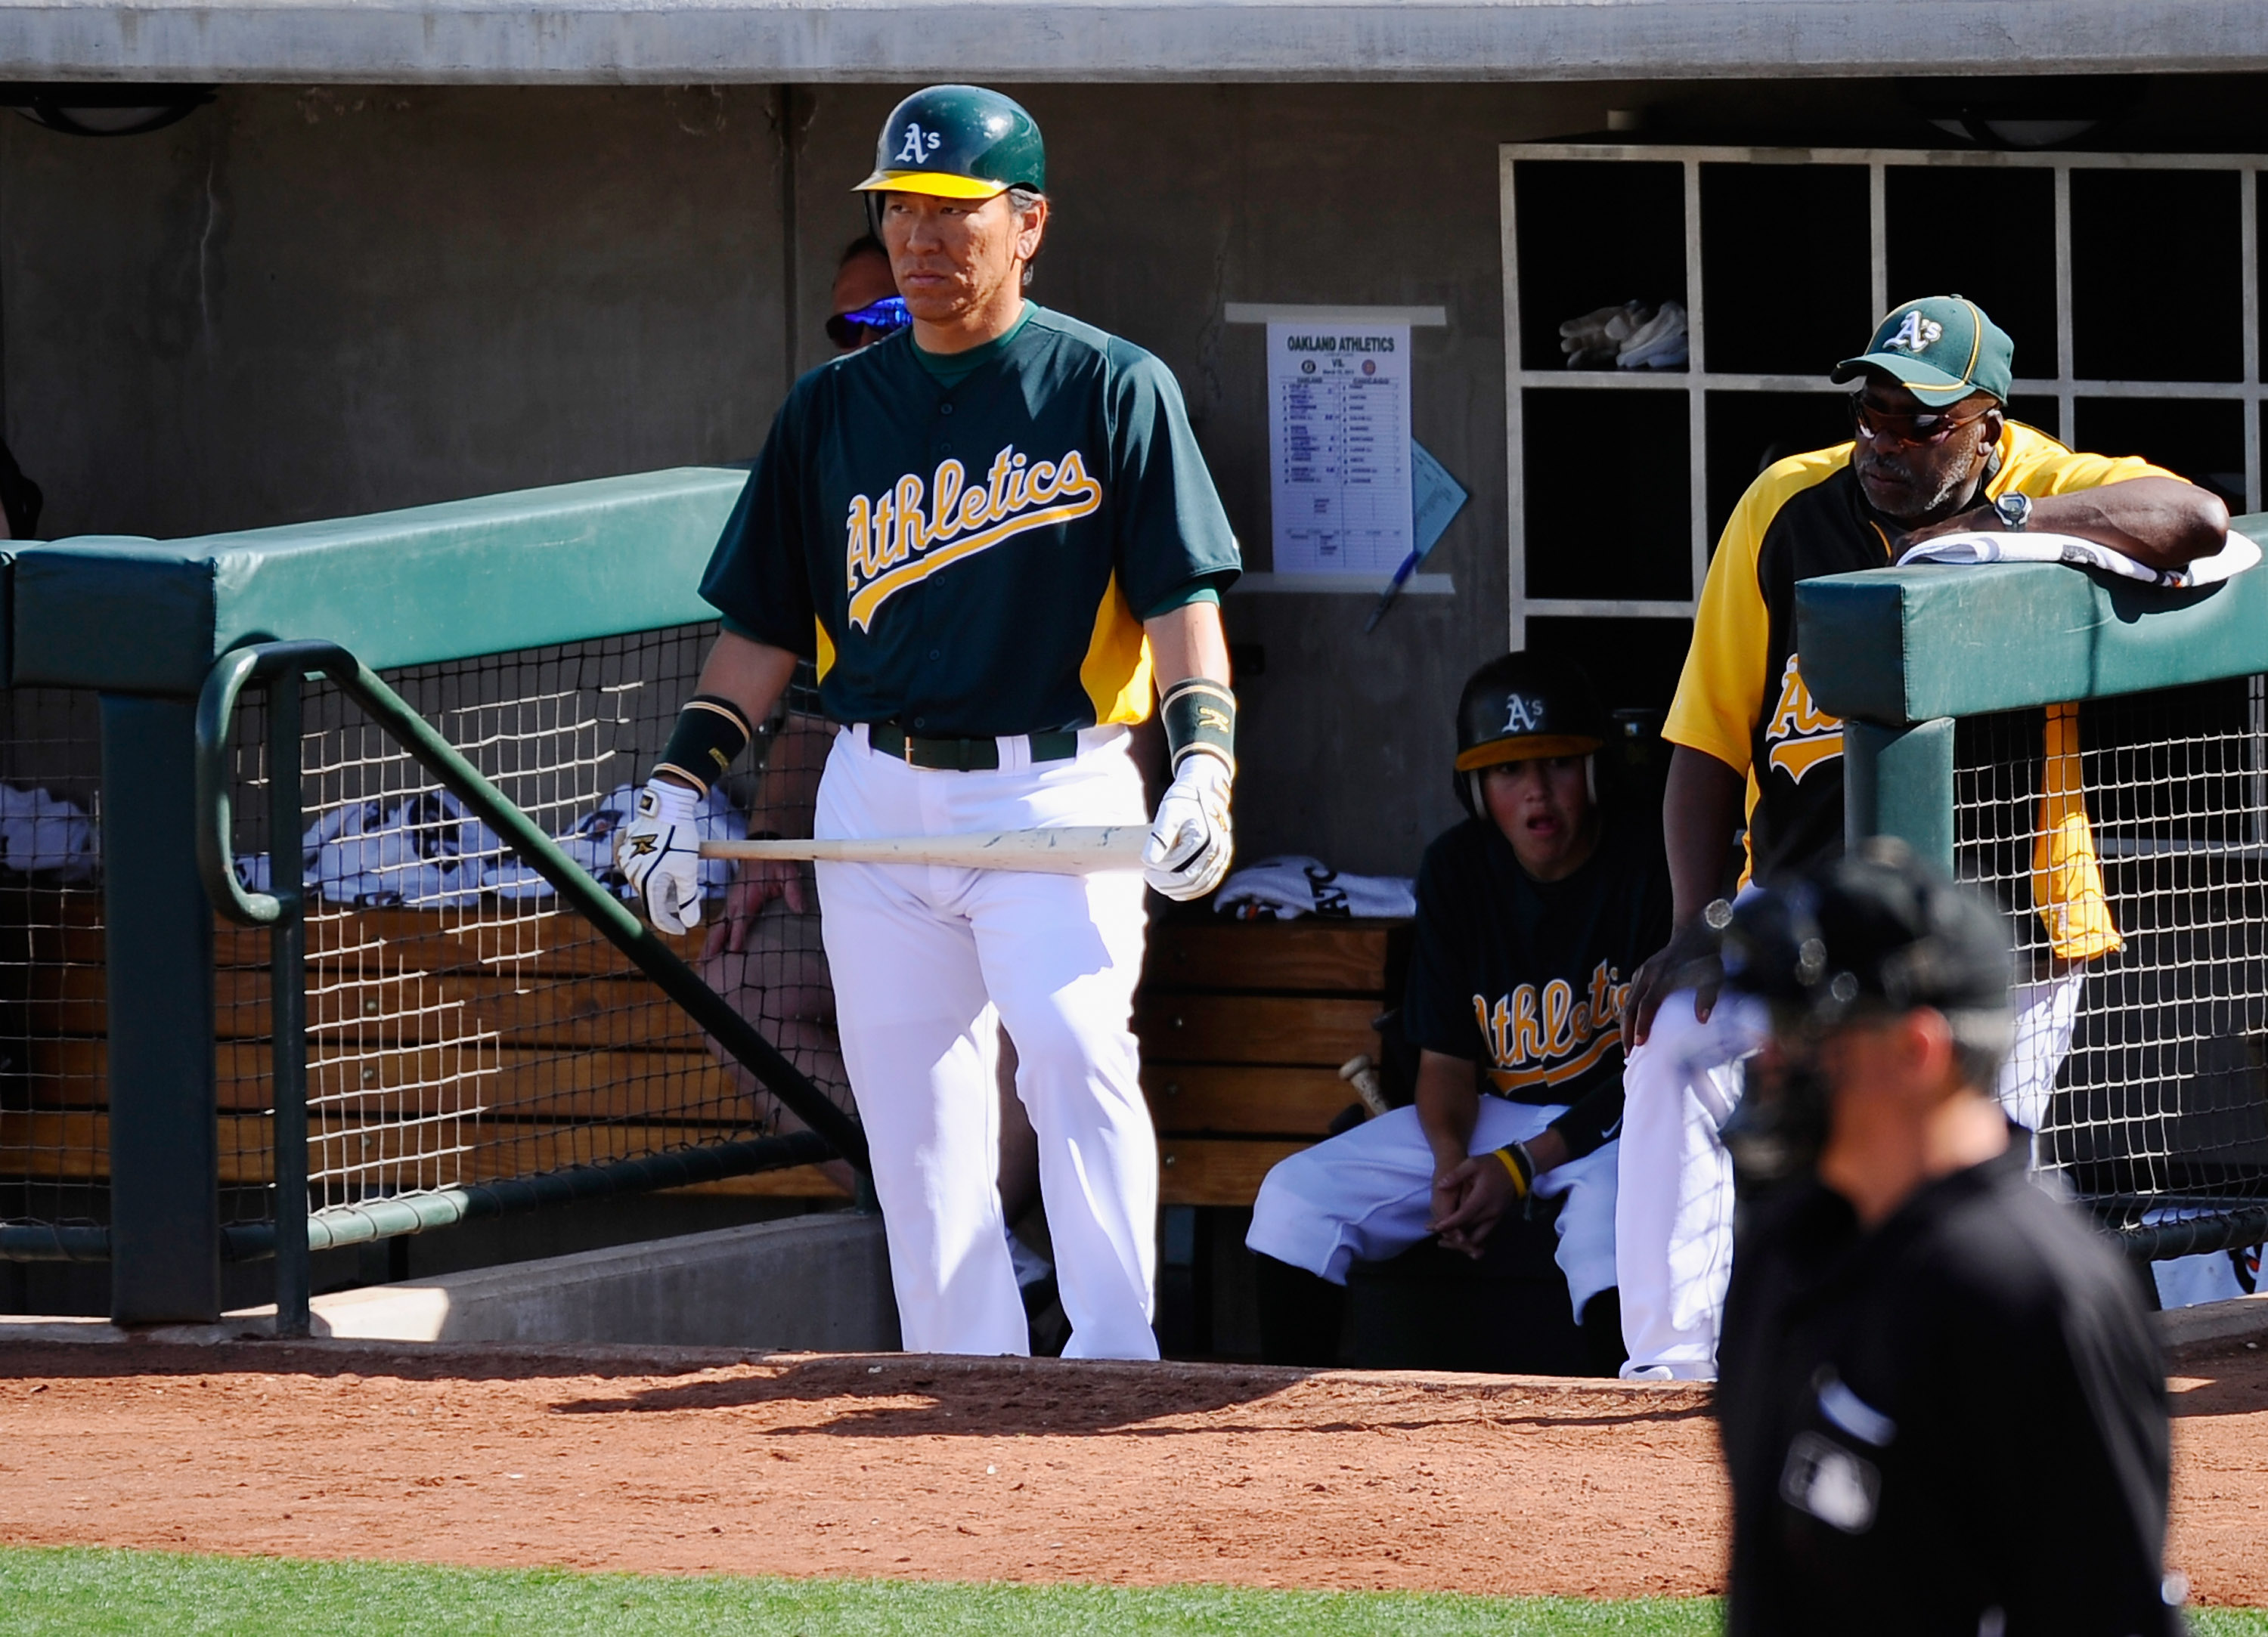 PHOENIX, AZ - MARCH 15:  Hideki Matsui #55 of the Oakland Athletics during the spring training baseball game against the Chicago Cubs at Phoenix Municipal Stadium on March 15, 2011 in Phoenix, Arizona.  (Photo by Kevork Djansezian/Getty Images)